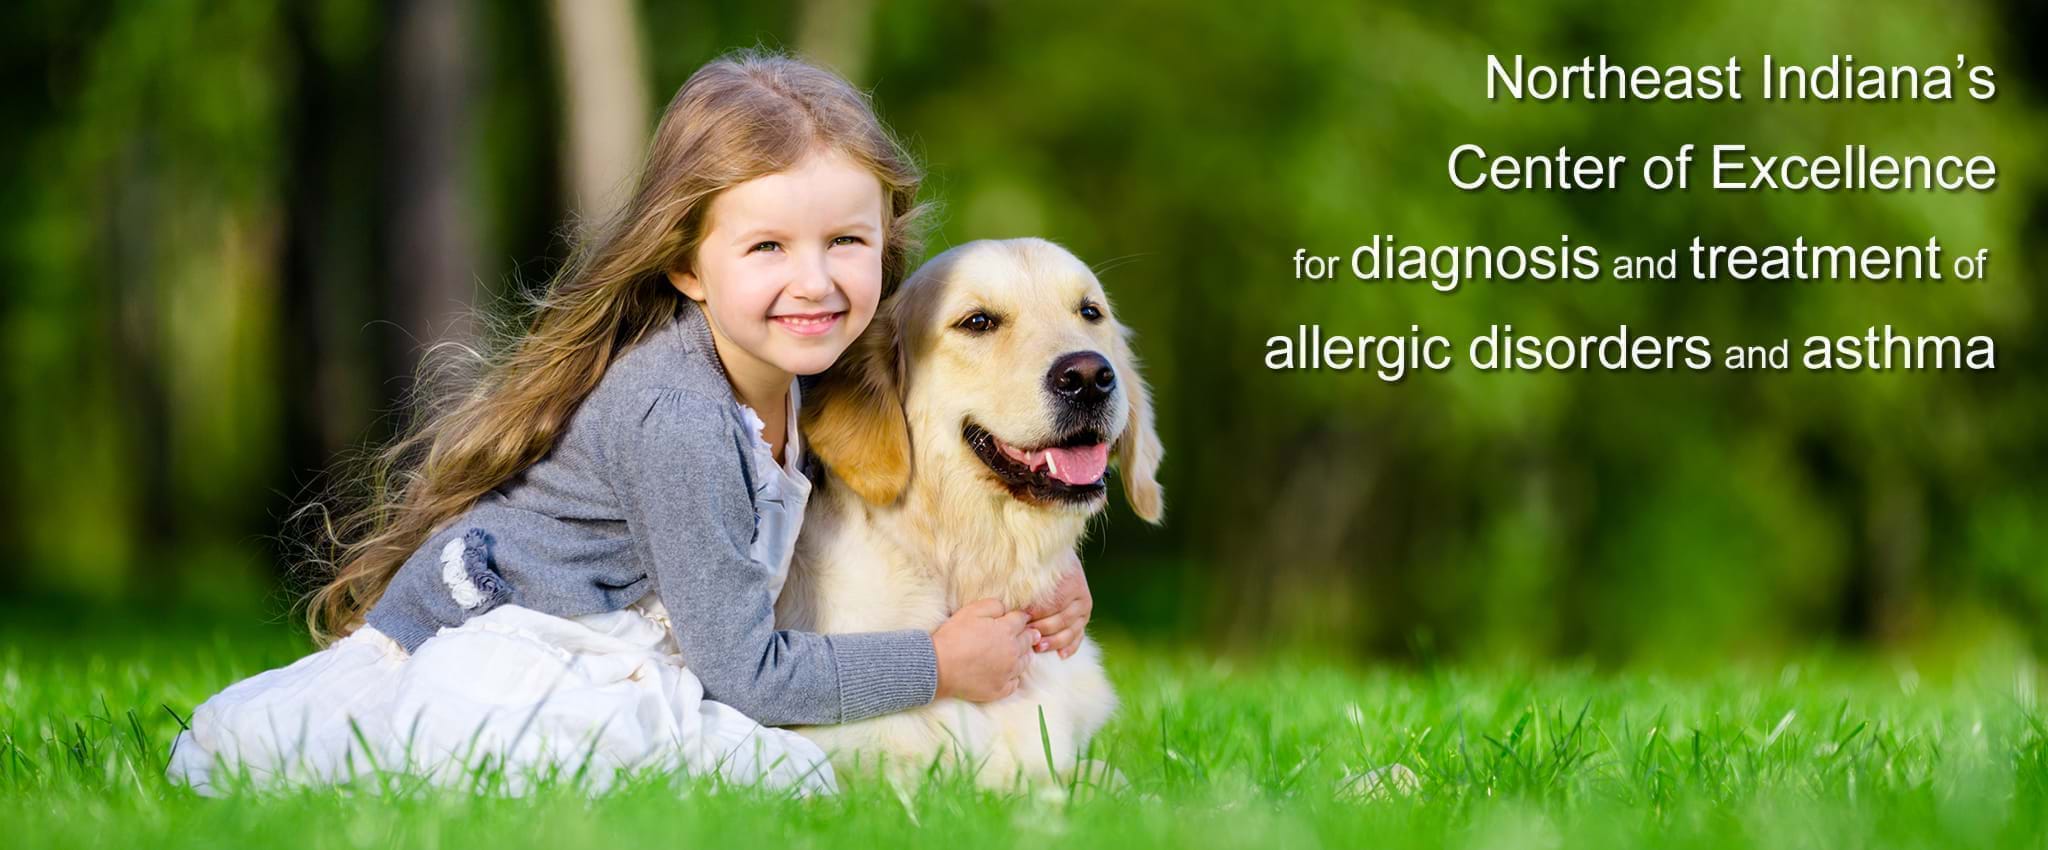 Northeast Indiana’s Center of Excellence for diagnosis and treatment of allergic disorders and asthma